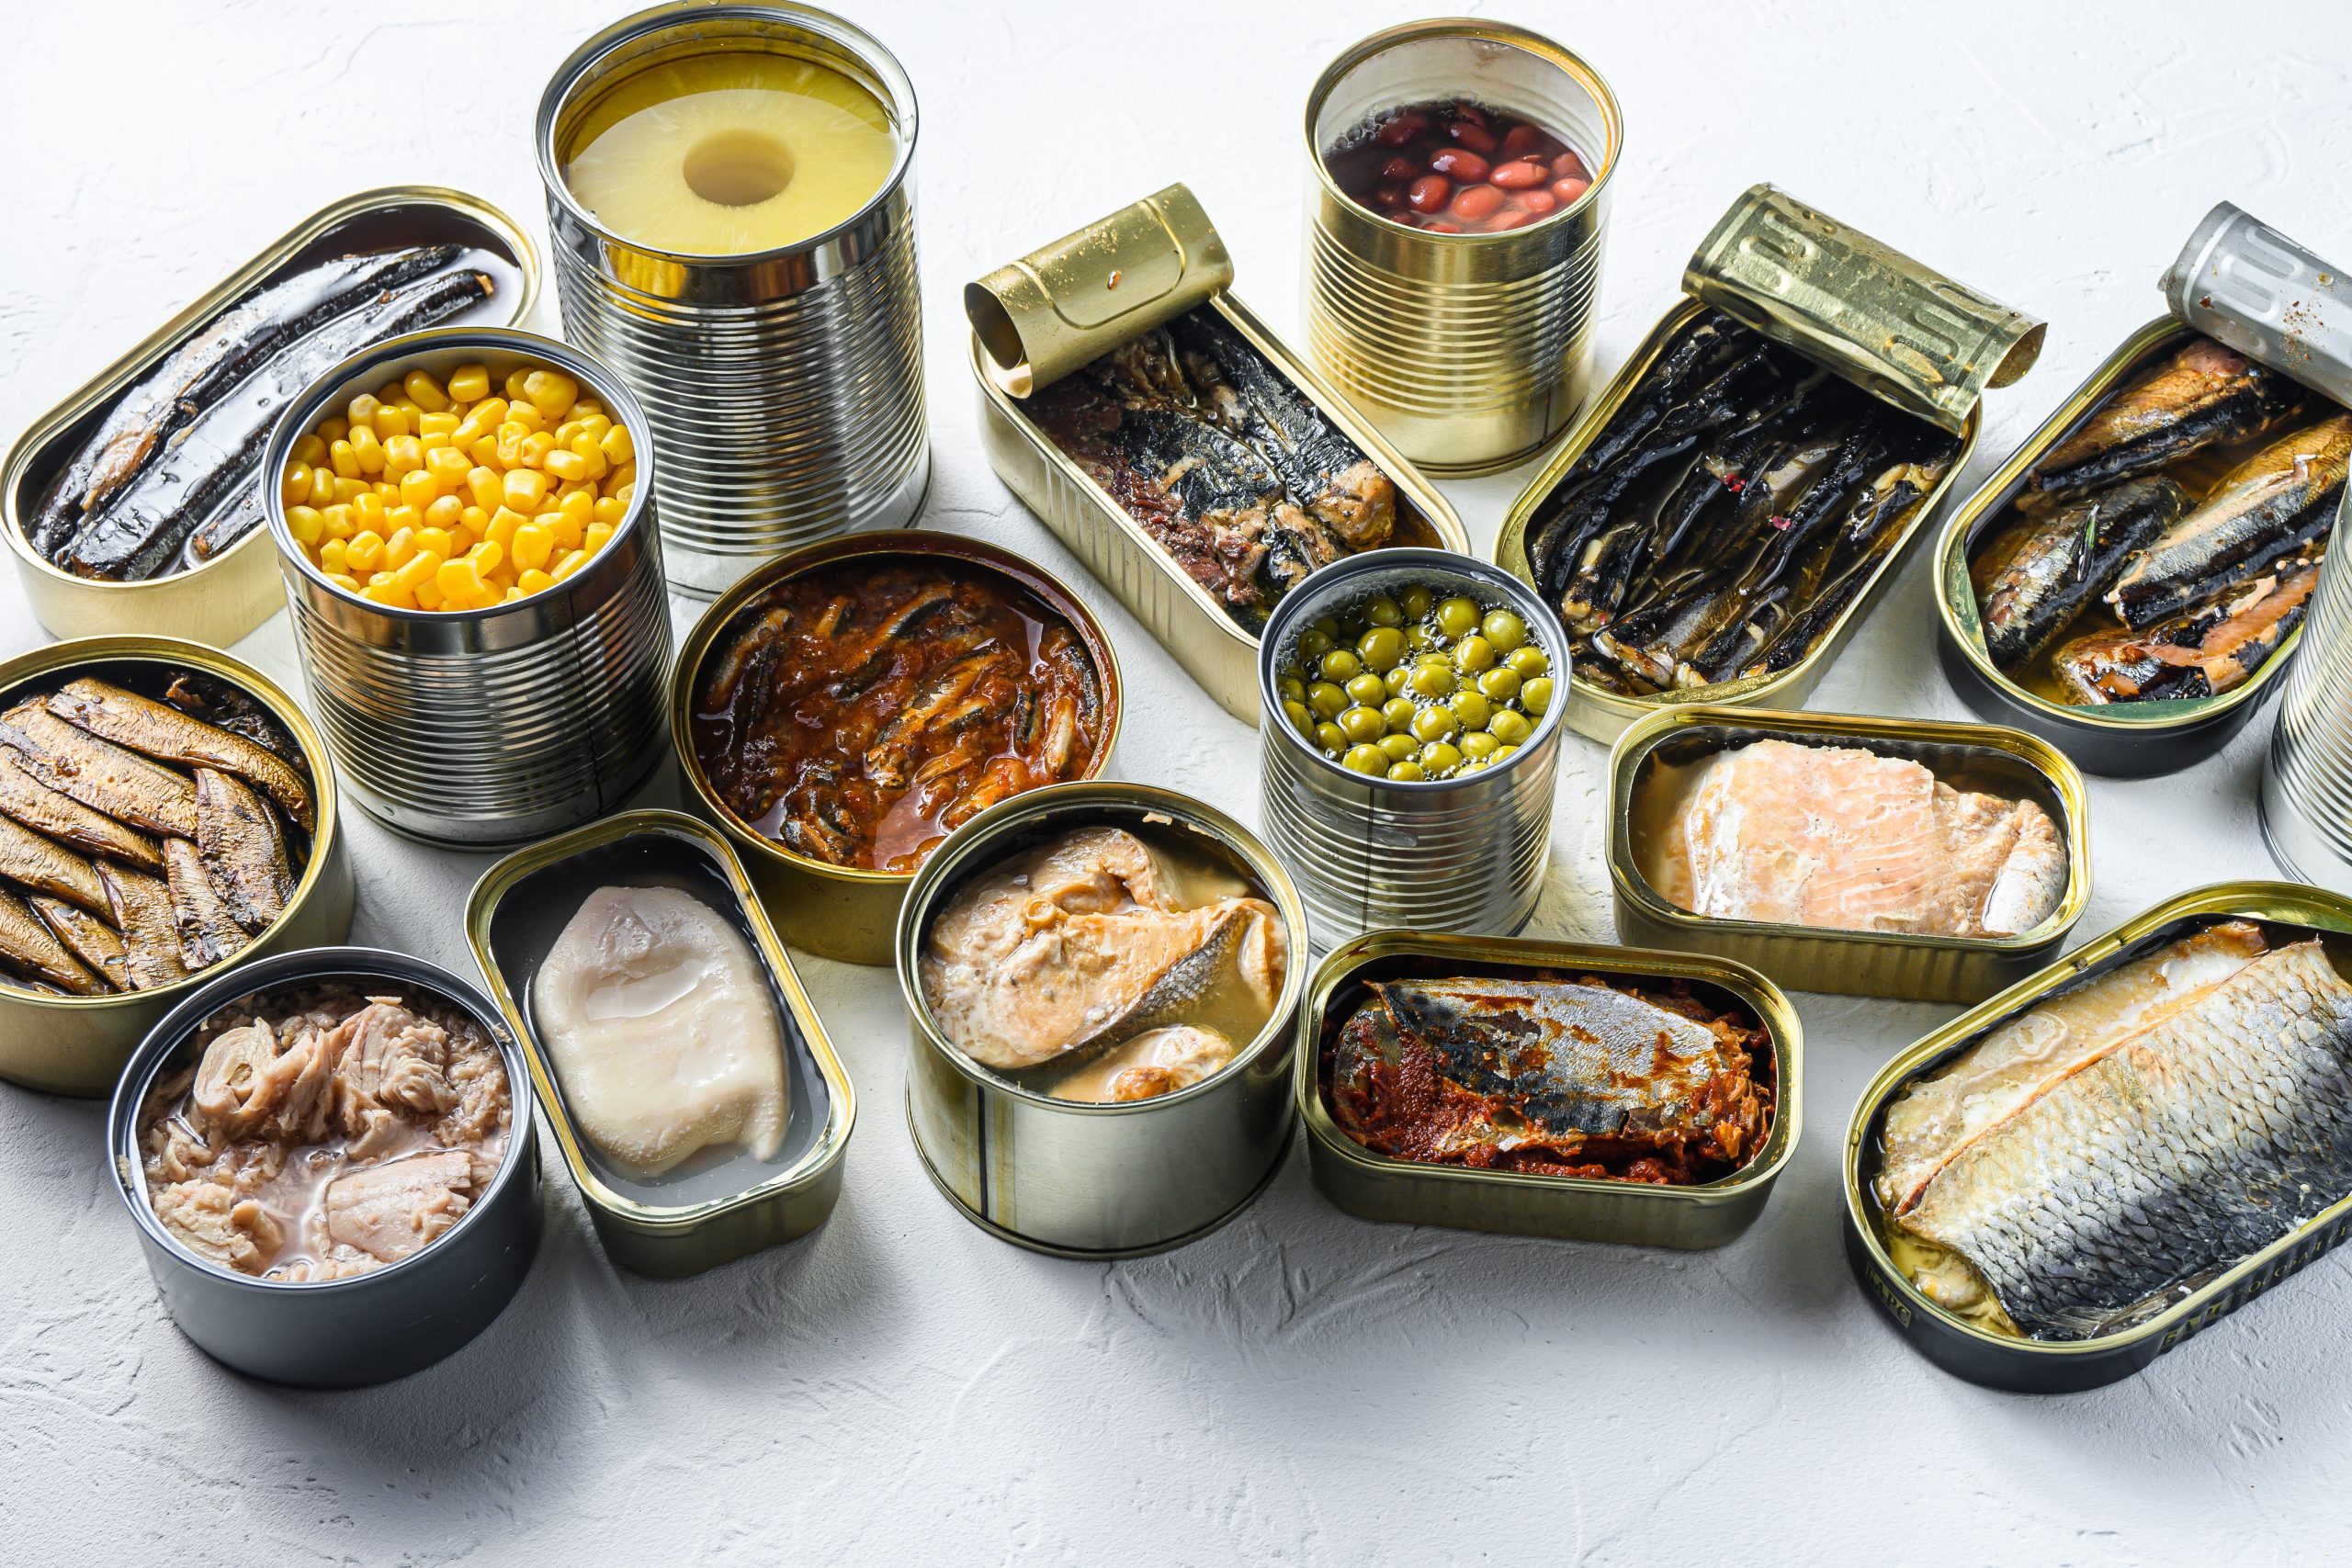 What is the best way to eat canned fish